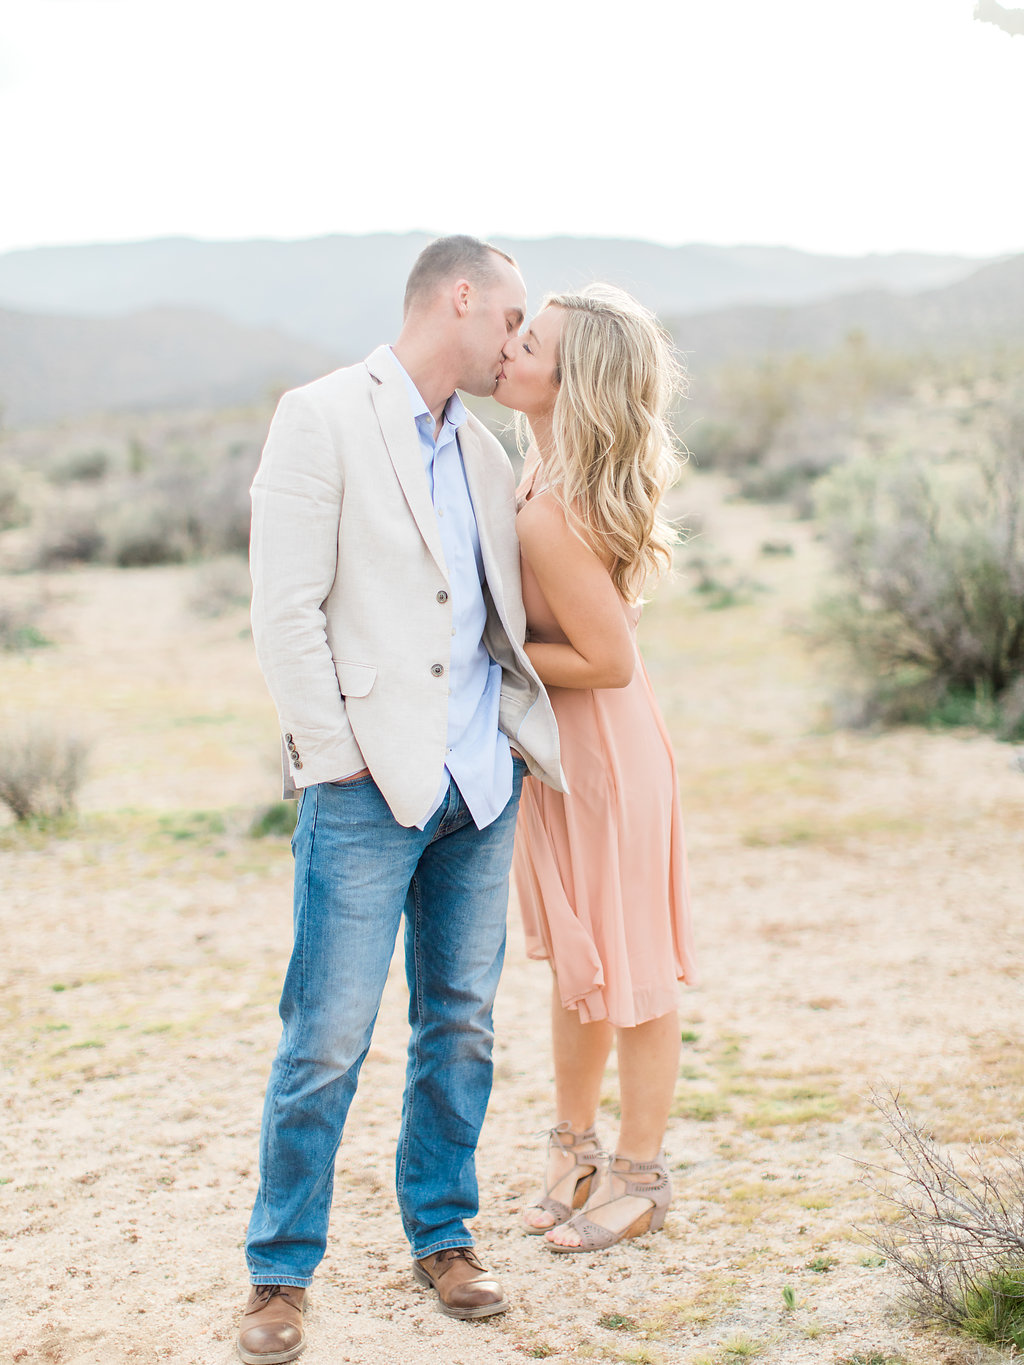 Joshua Tree Engagement Session | What to Wear for Pictures | Southern California Wedding Photographer | Mastin Labs Fuji Film | Fine Art Photographer | Desert Shoot | 29 Palms Photo Session.jpg